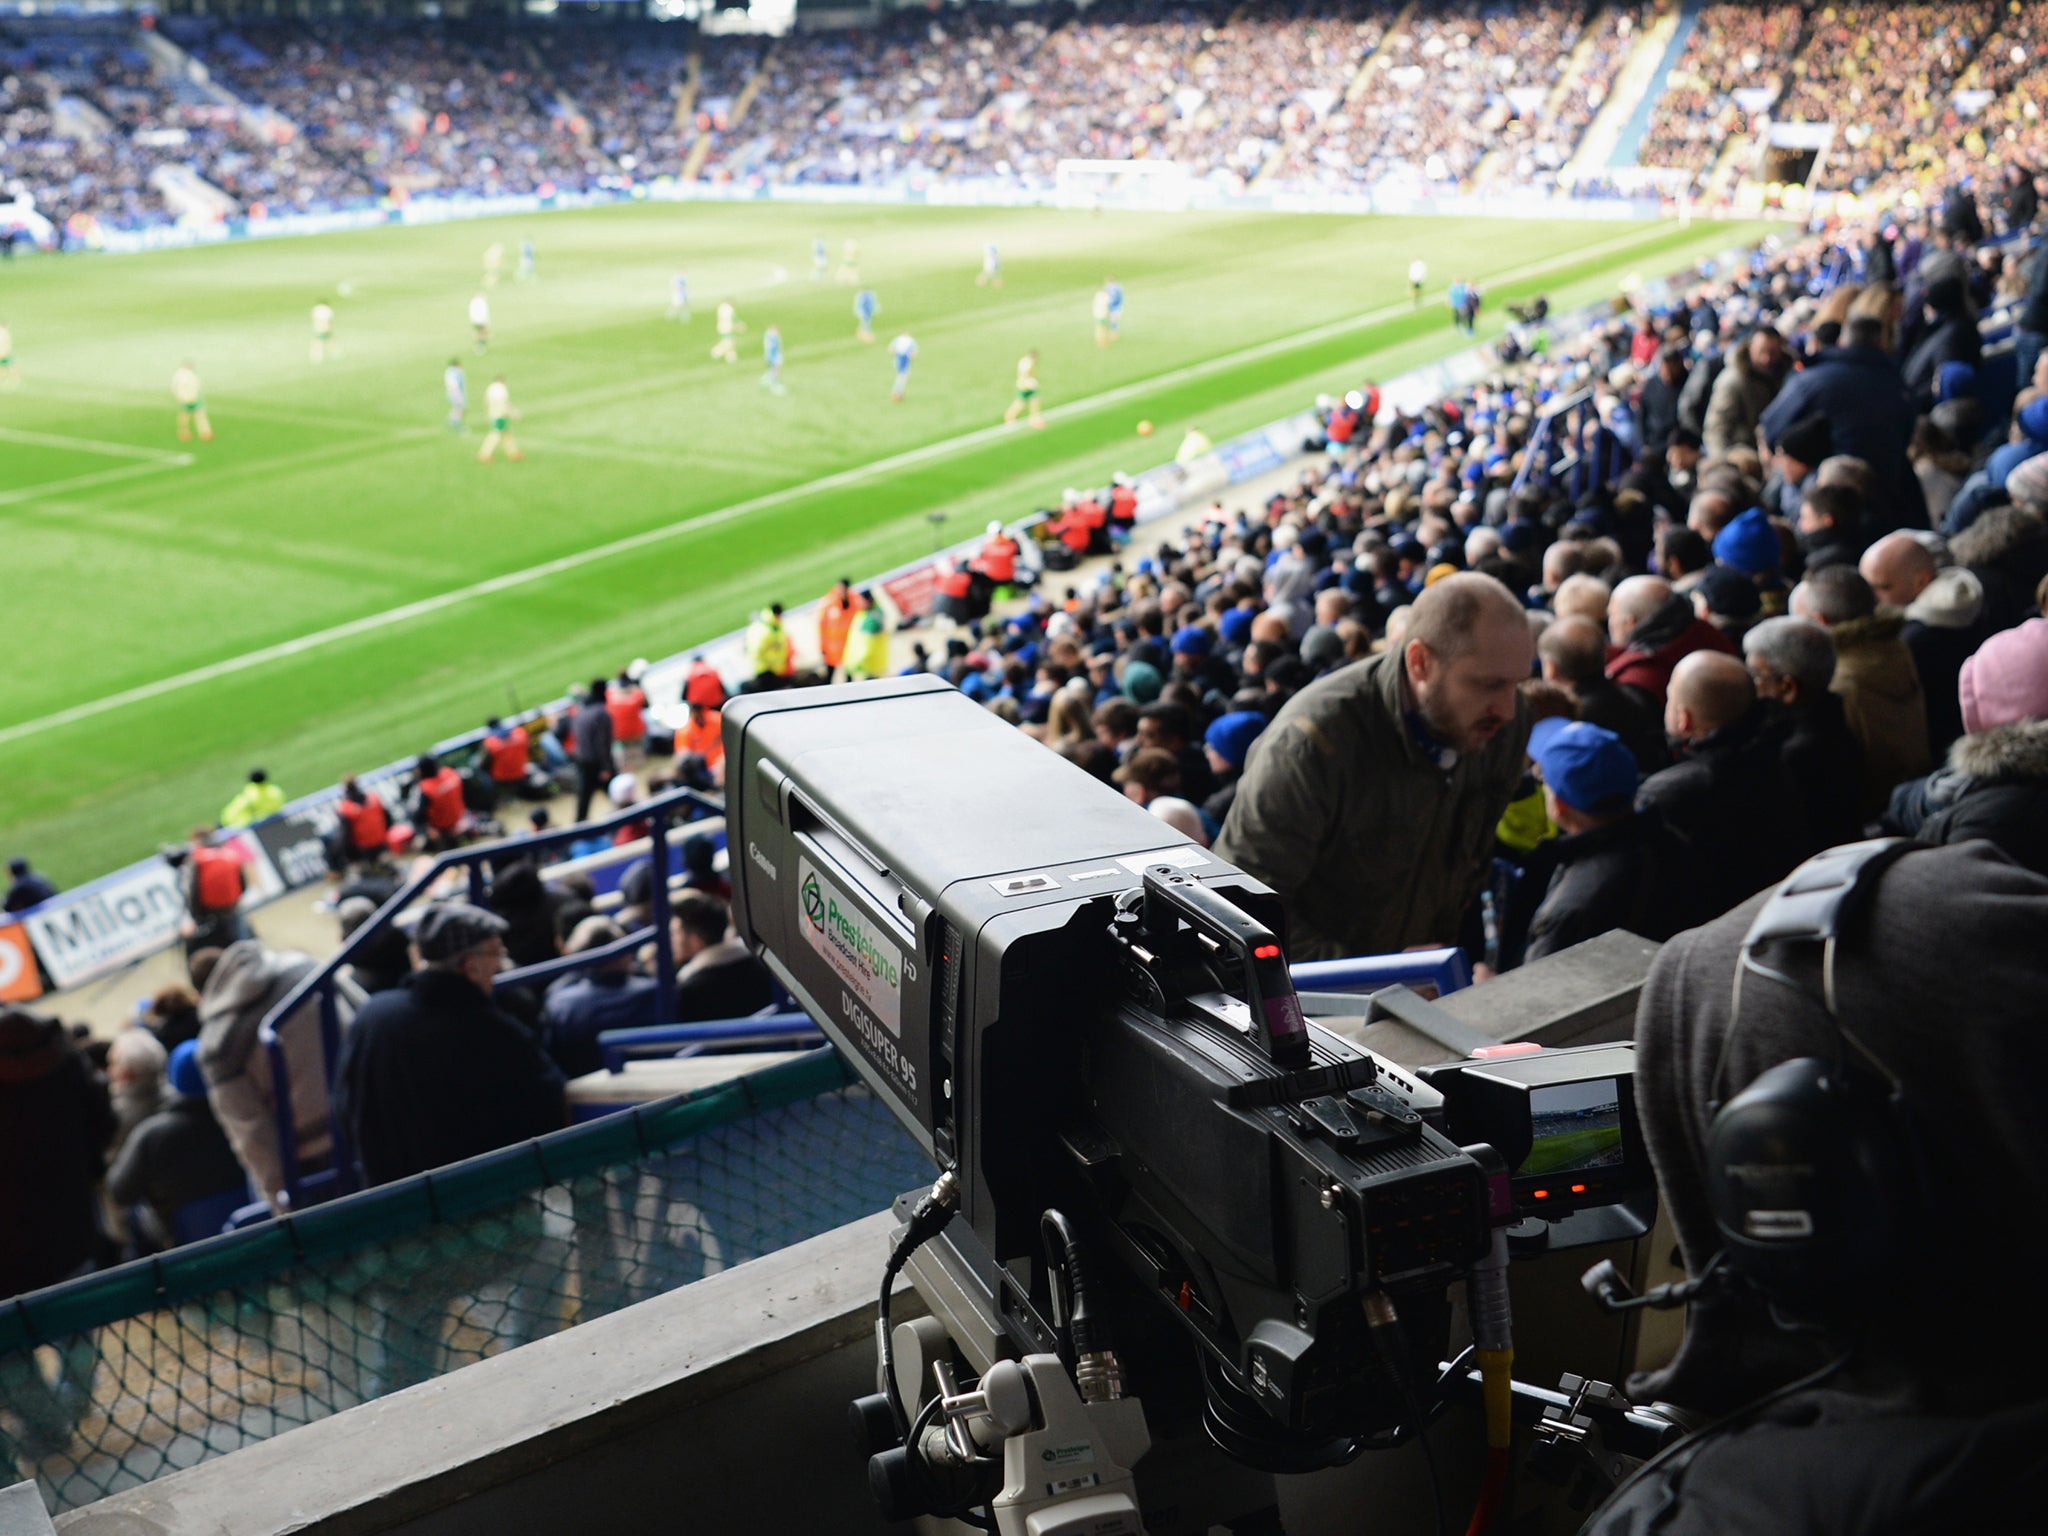 Amazon Prime will show up 20 Premier League matches per season from 2019/20